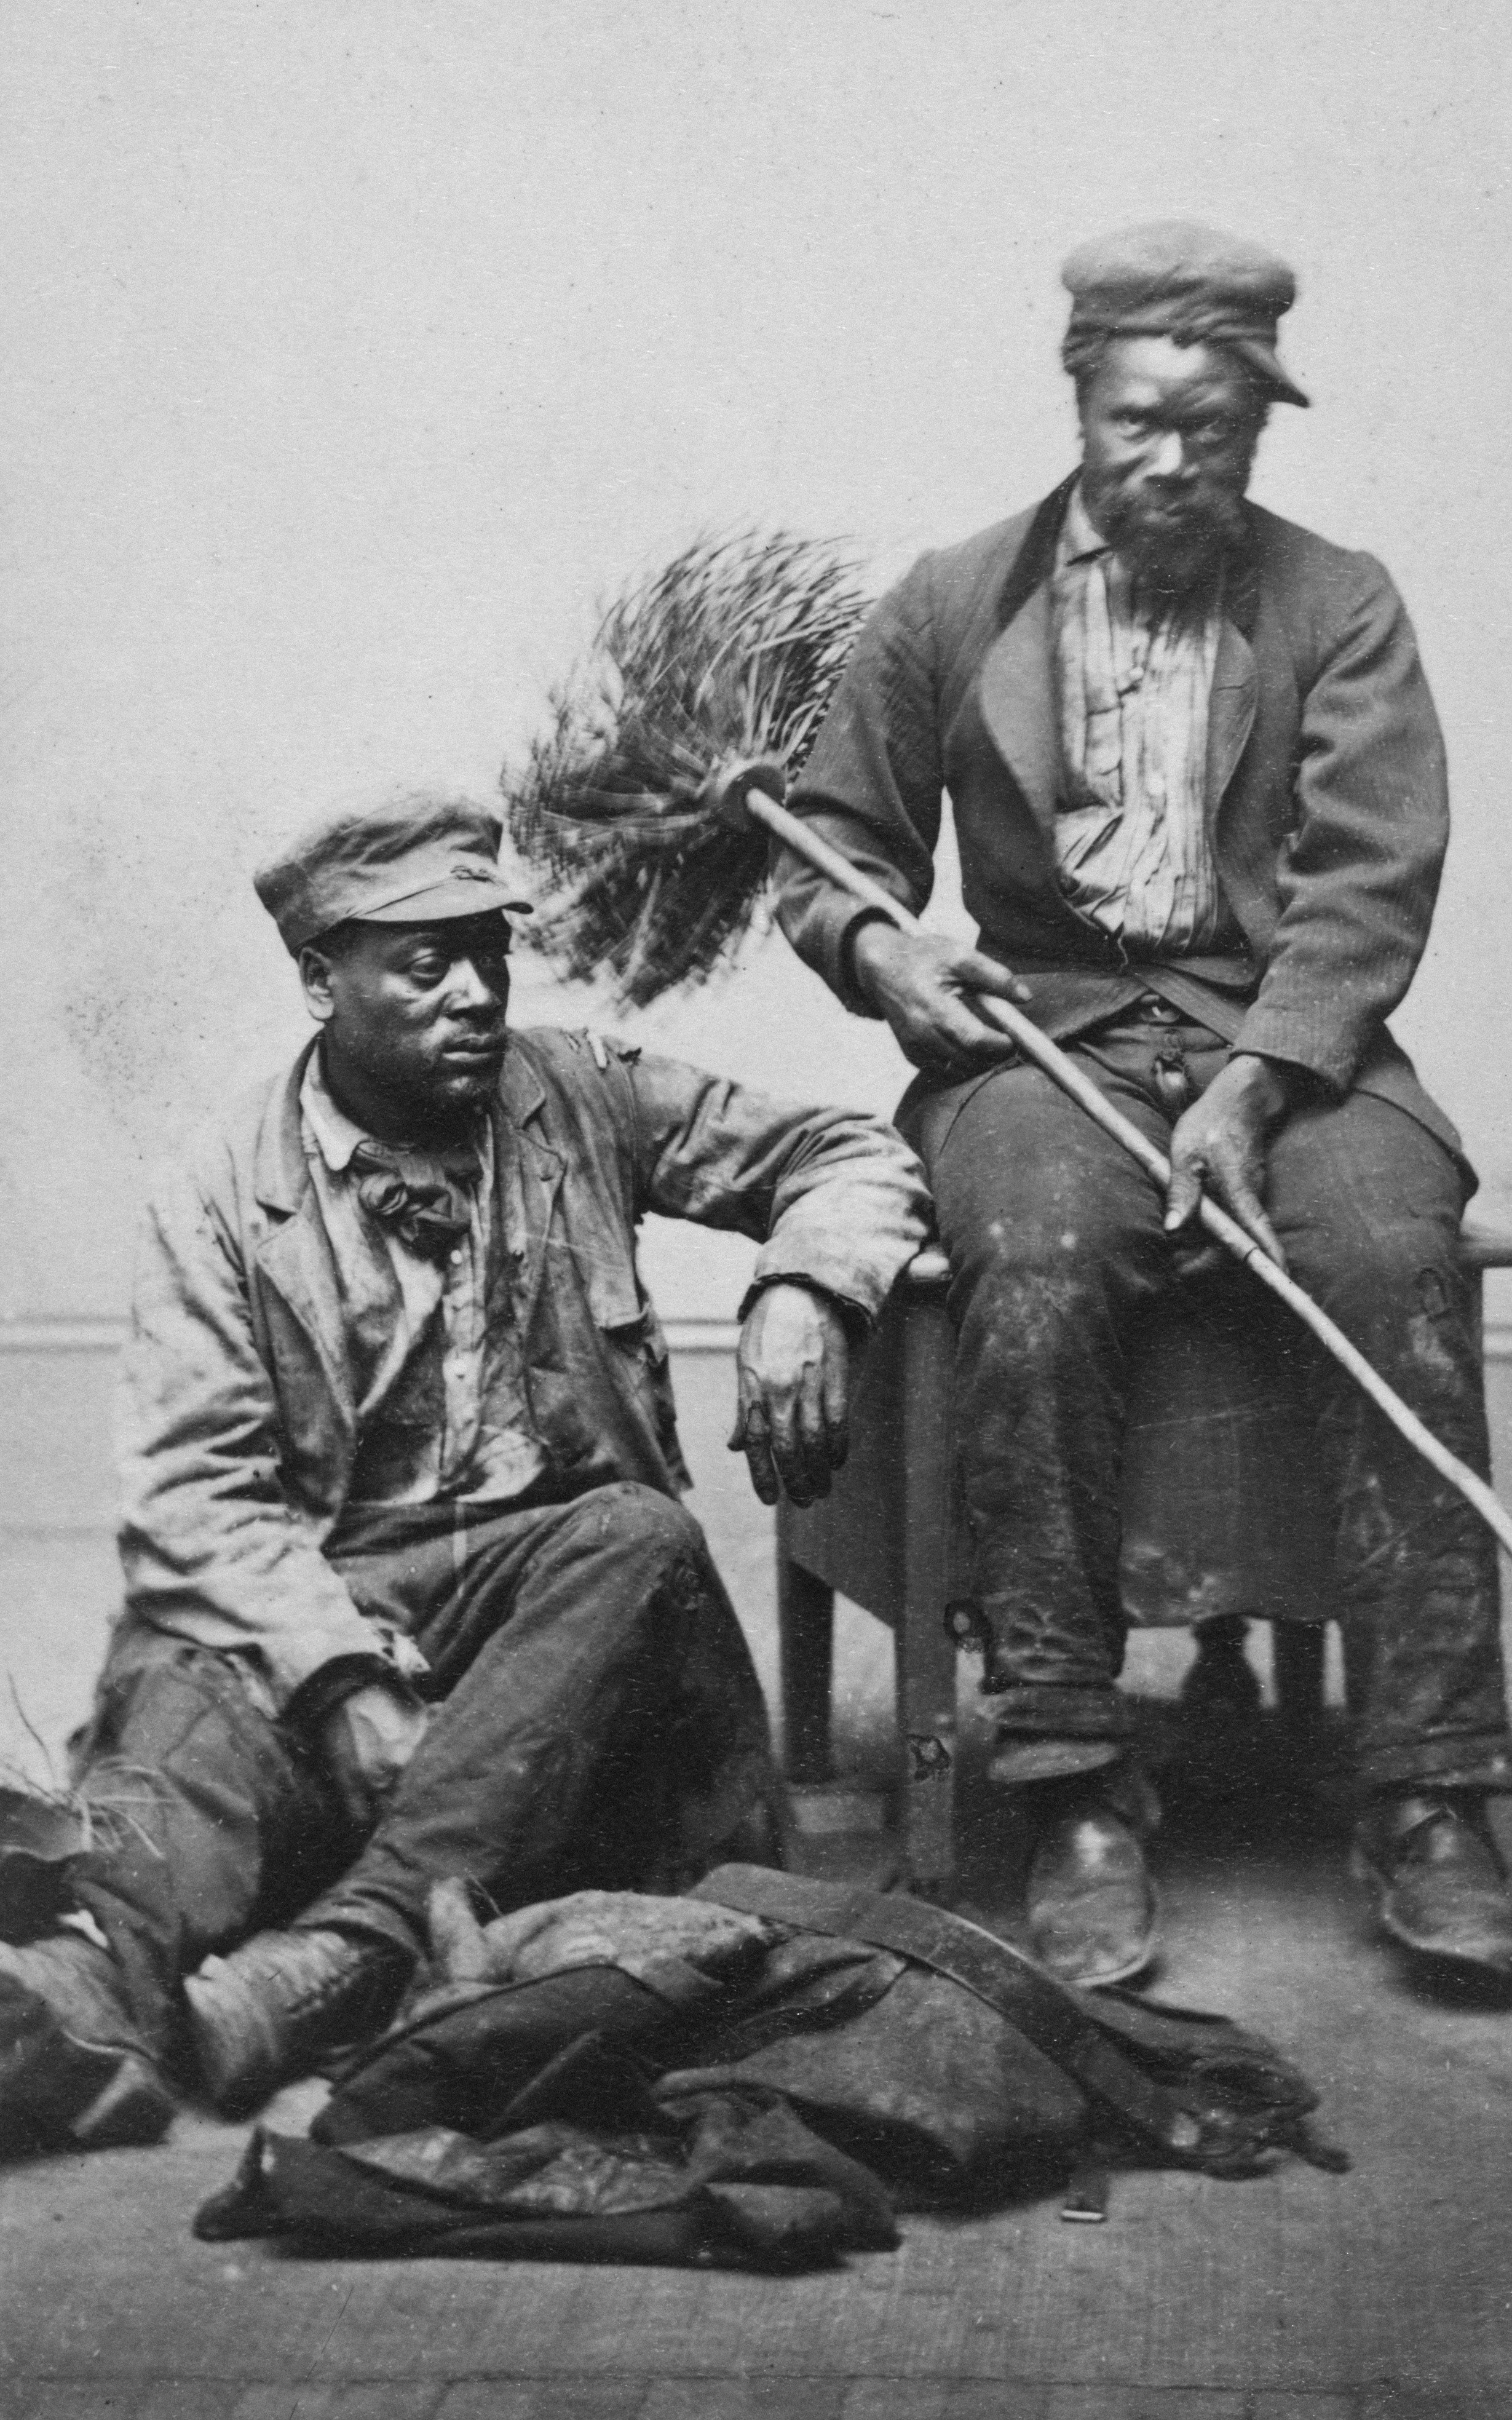 [Occupational portrait of two African American chimney sweeps]. By Charles D. Fredricks \u0026 Co., between 1860 and 1870. Library of Congress Prints \u0026 Photographs Division. https://www.loc.gov/item/2010647798/